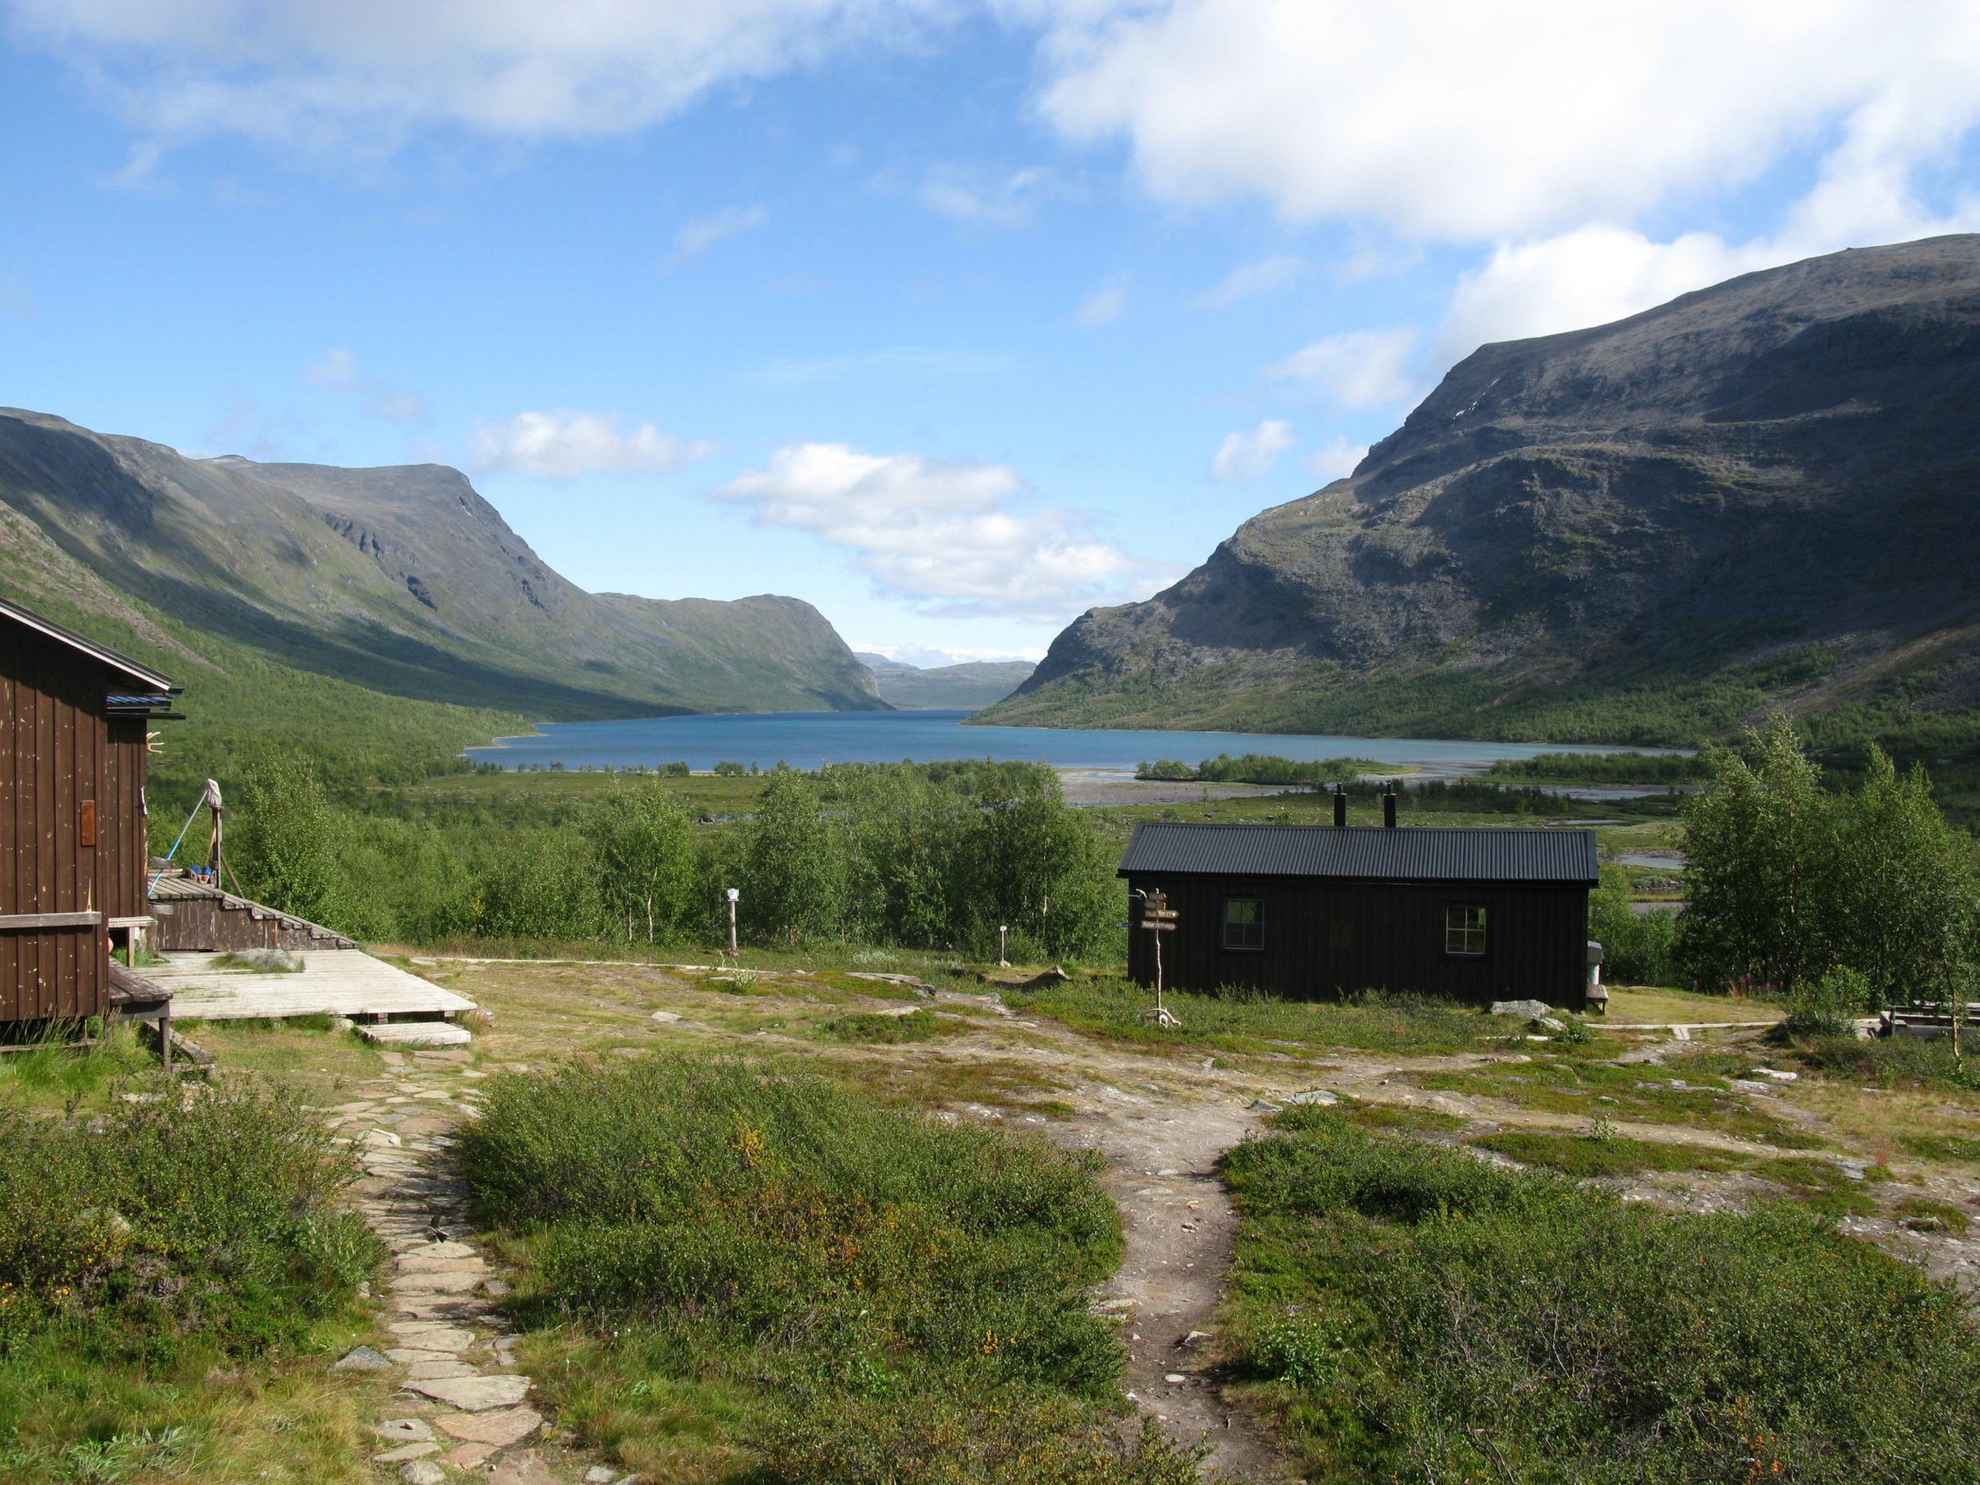 Mountain huts by the King's trail, Swedish Lapland